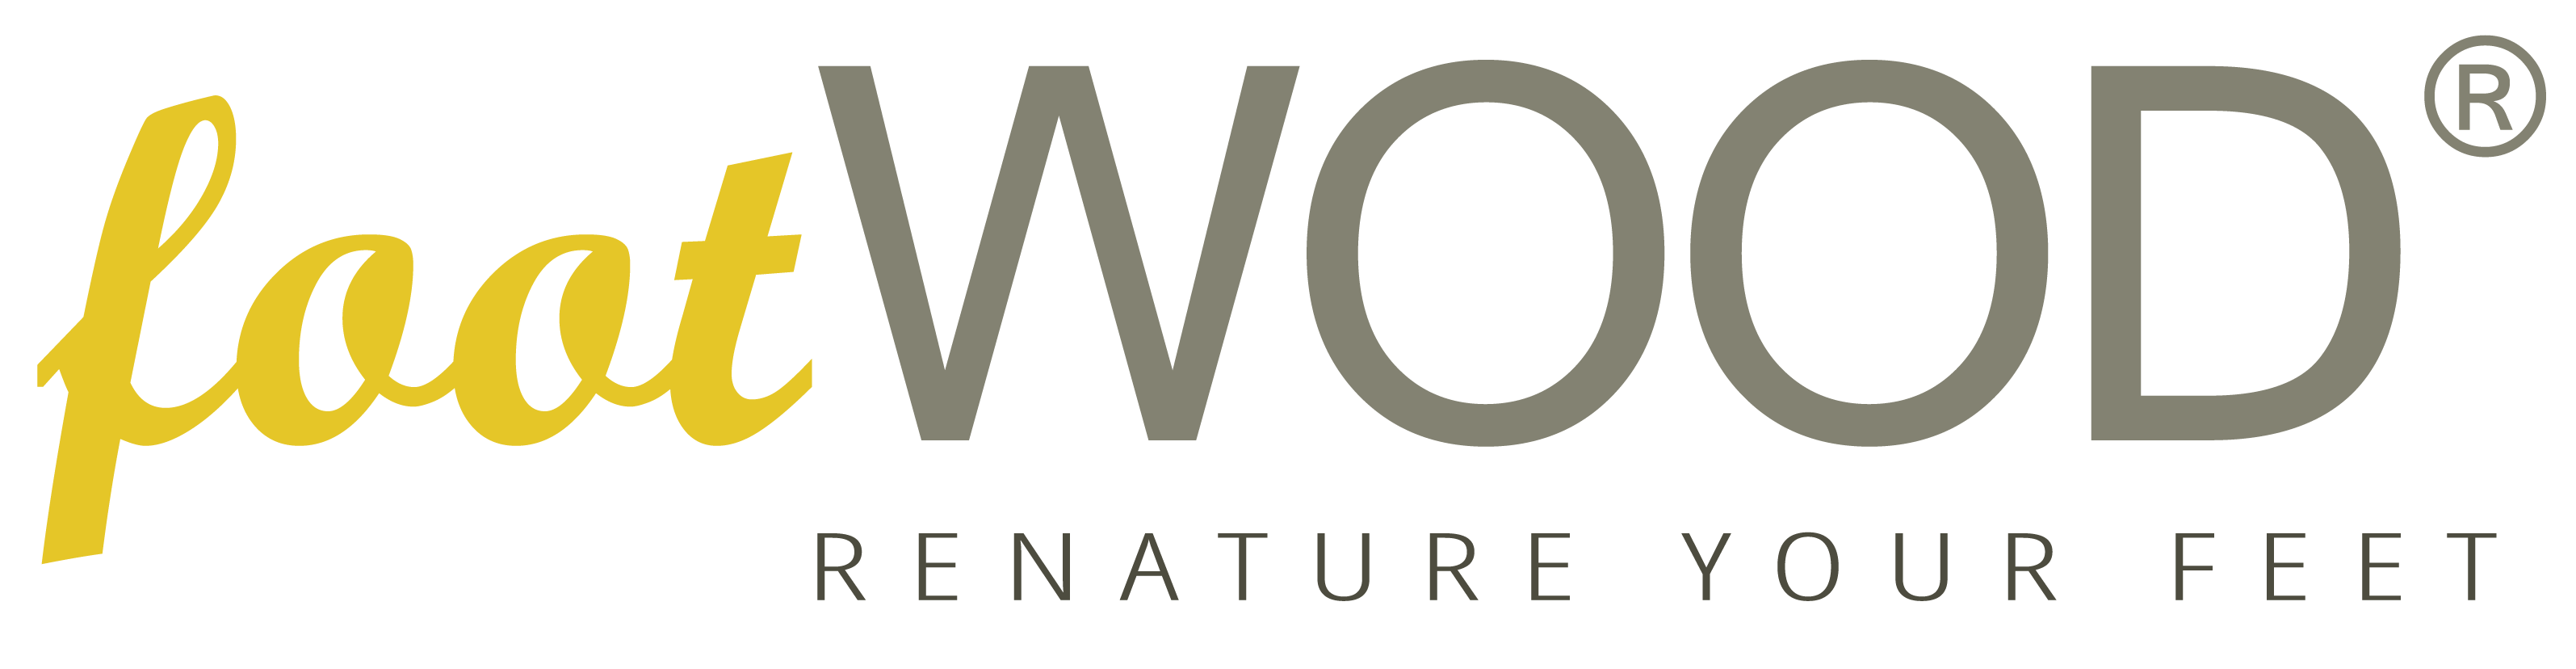 Logo footWOOD - renature your feet